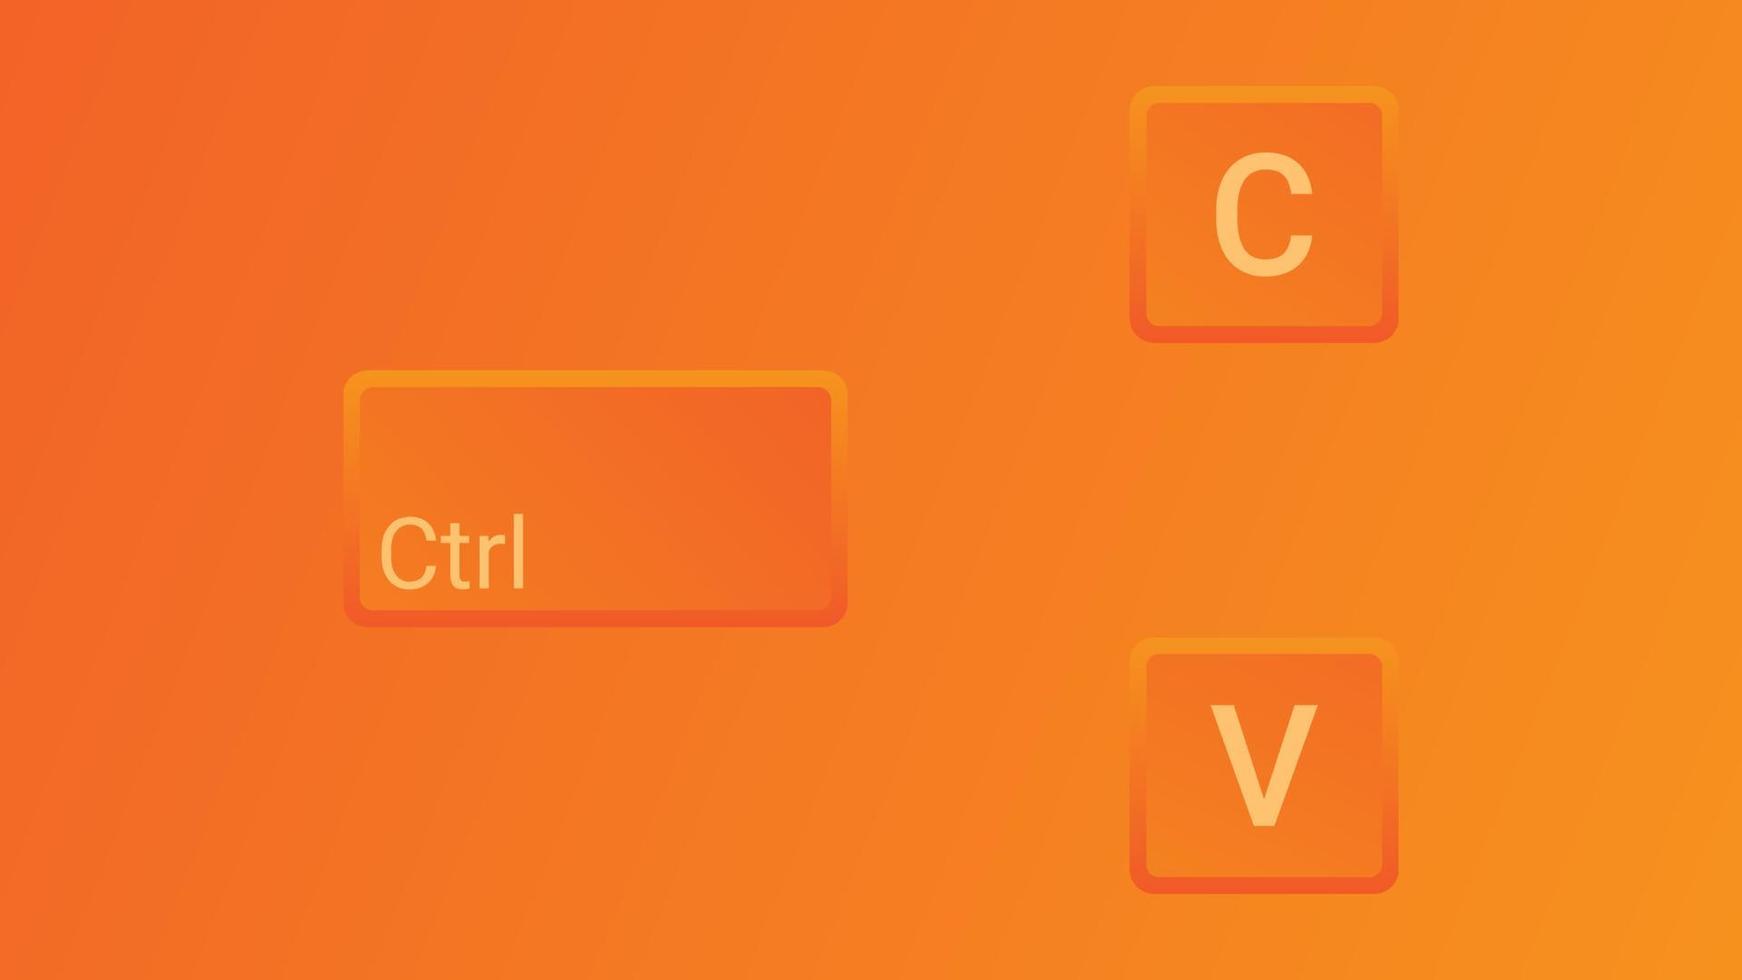 keyboard keys Ctrl C and Ctrl V, copy and paste the key shortcuts. Computer icon on orange background vector